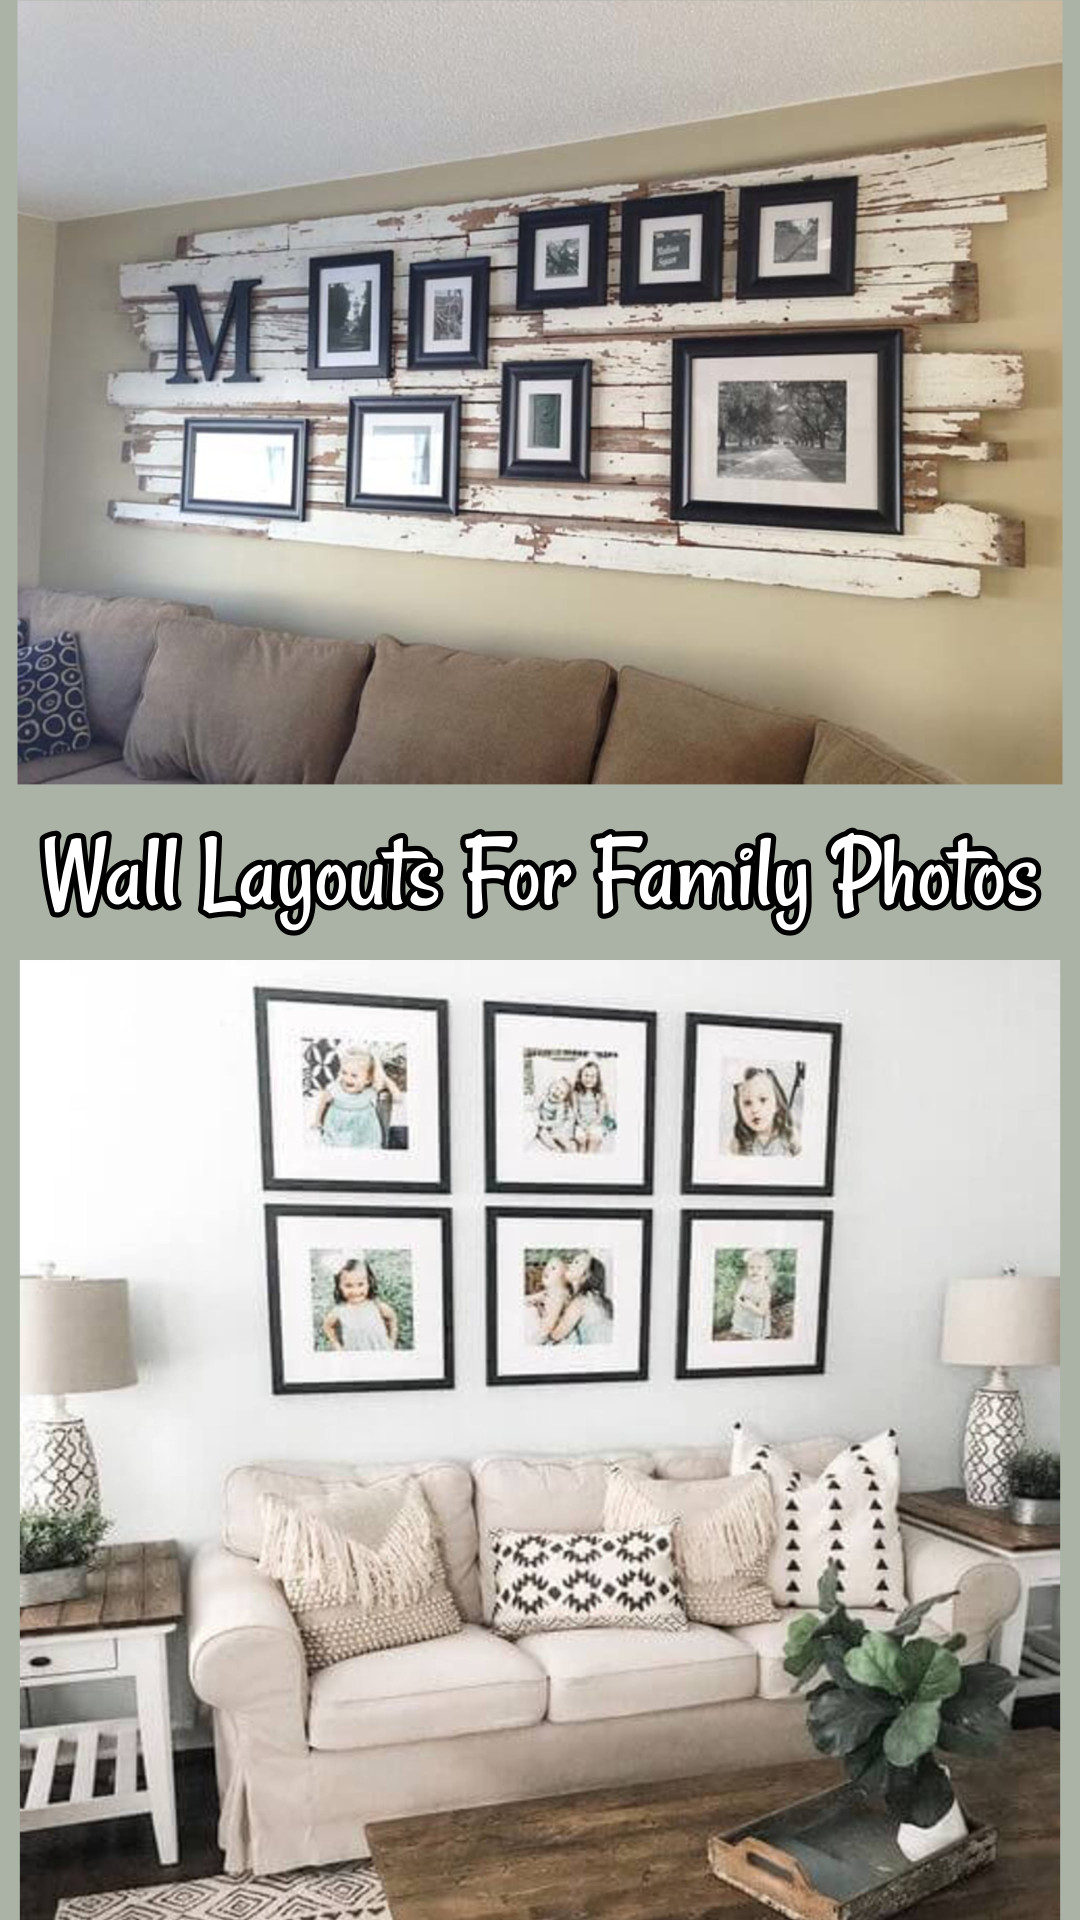 Wall layouts for family photos picture walls, gallery accent wall or mixtiles display over couch in living room